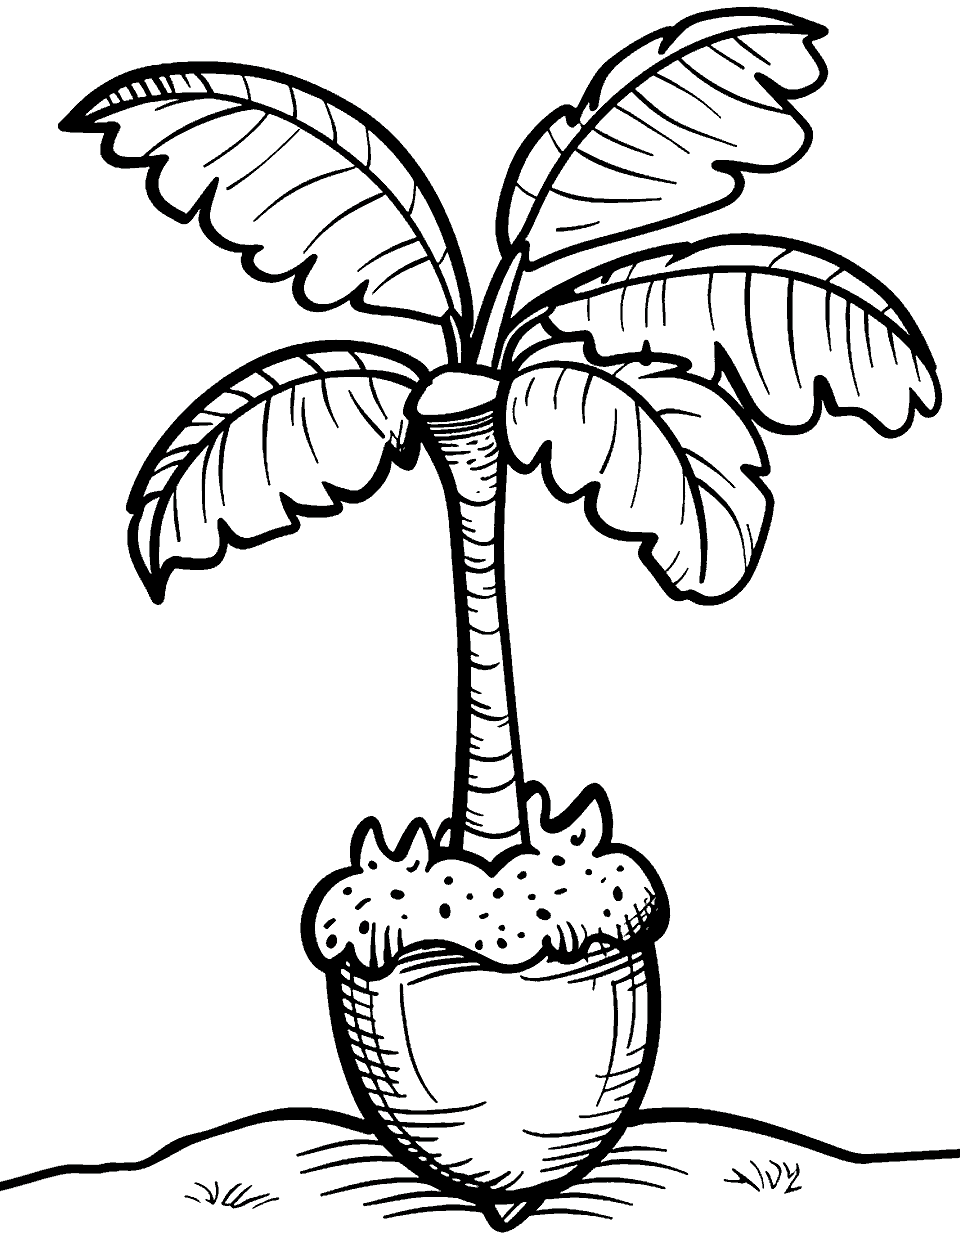 Acorn Sprout Coloring Page - A single acorn sprouting into a young oak tree.